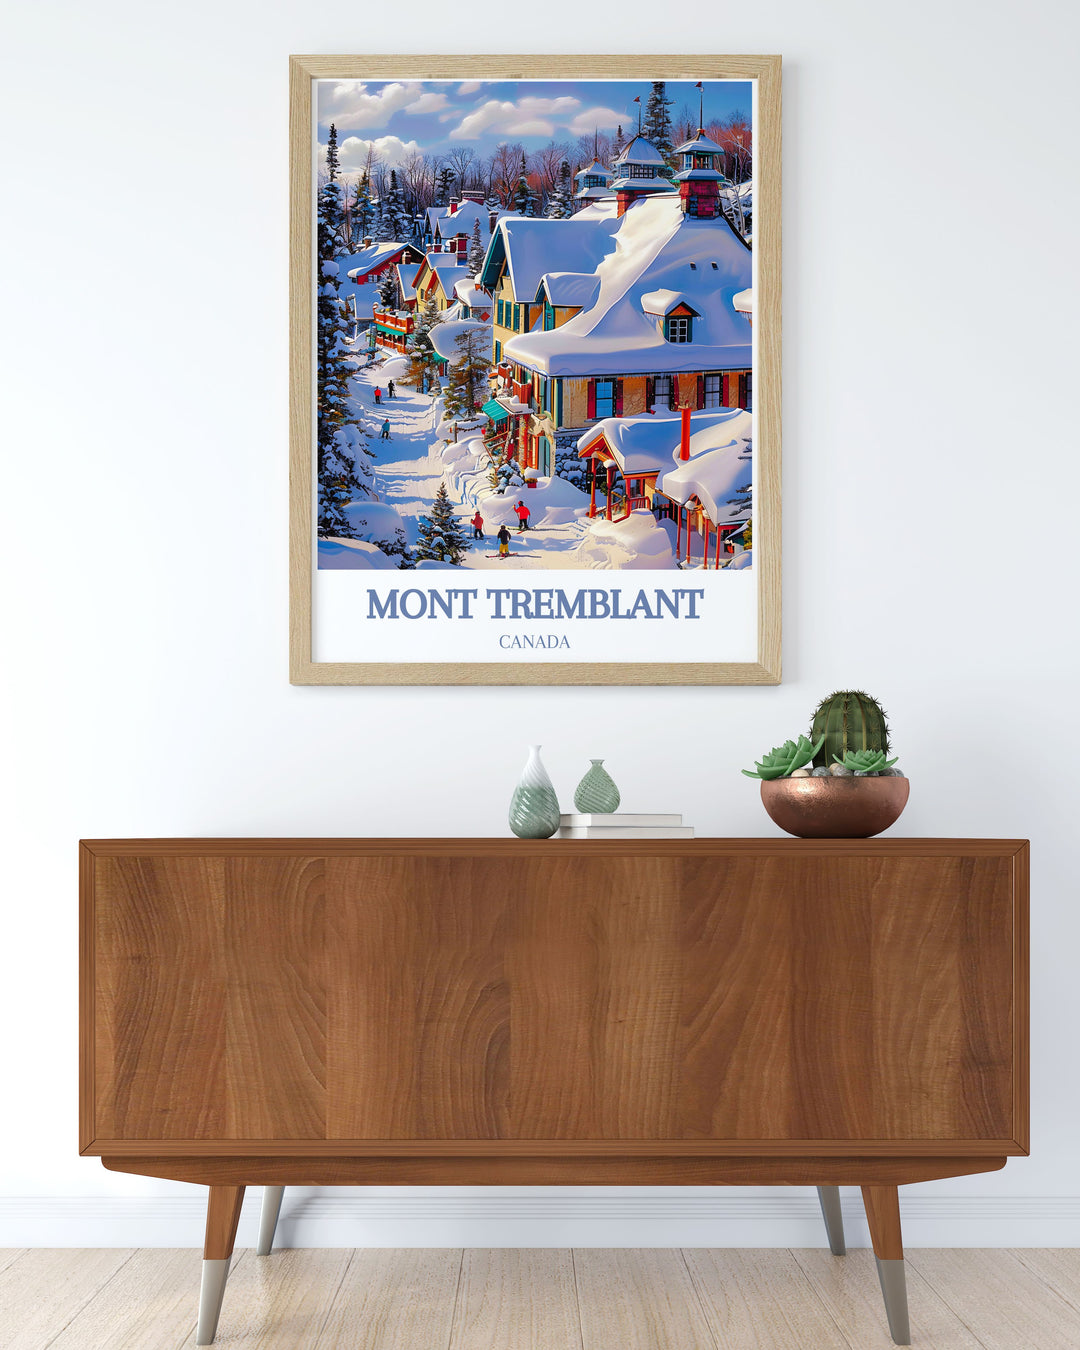 Tremblant Ski Resort Travel Poster capturing the essence of Mont Tremblant and the Laurentian Mountains with stunning detail and vibrant imagery ideal for nature lovers and ski enthusiasts looking to add adventure and sophistication to their home decor.